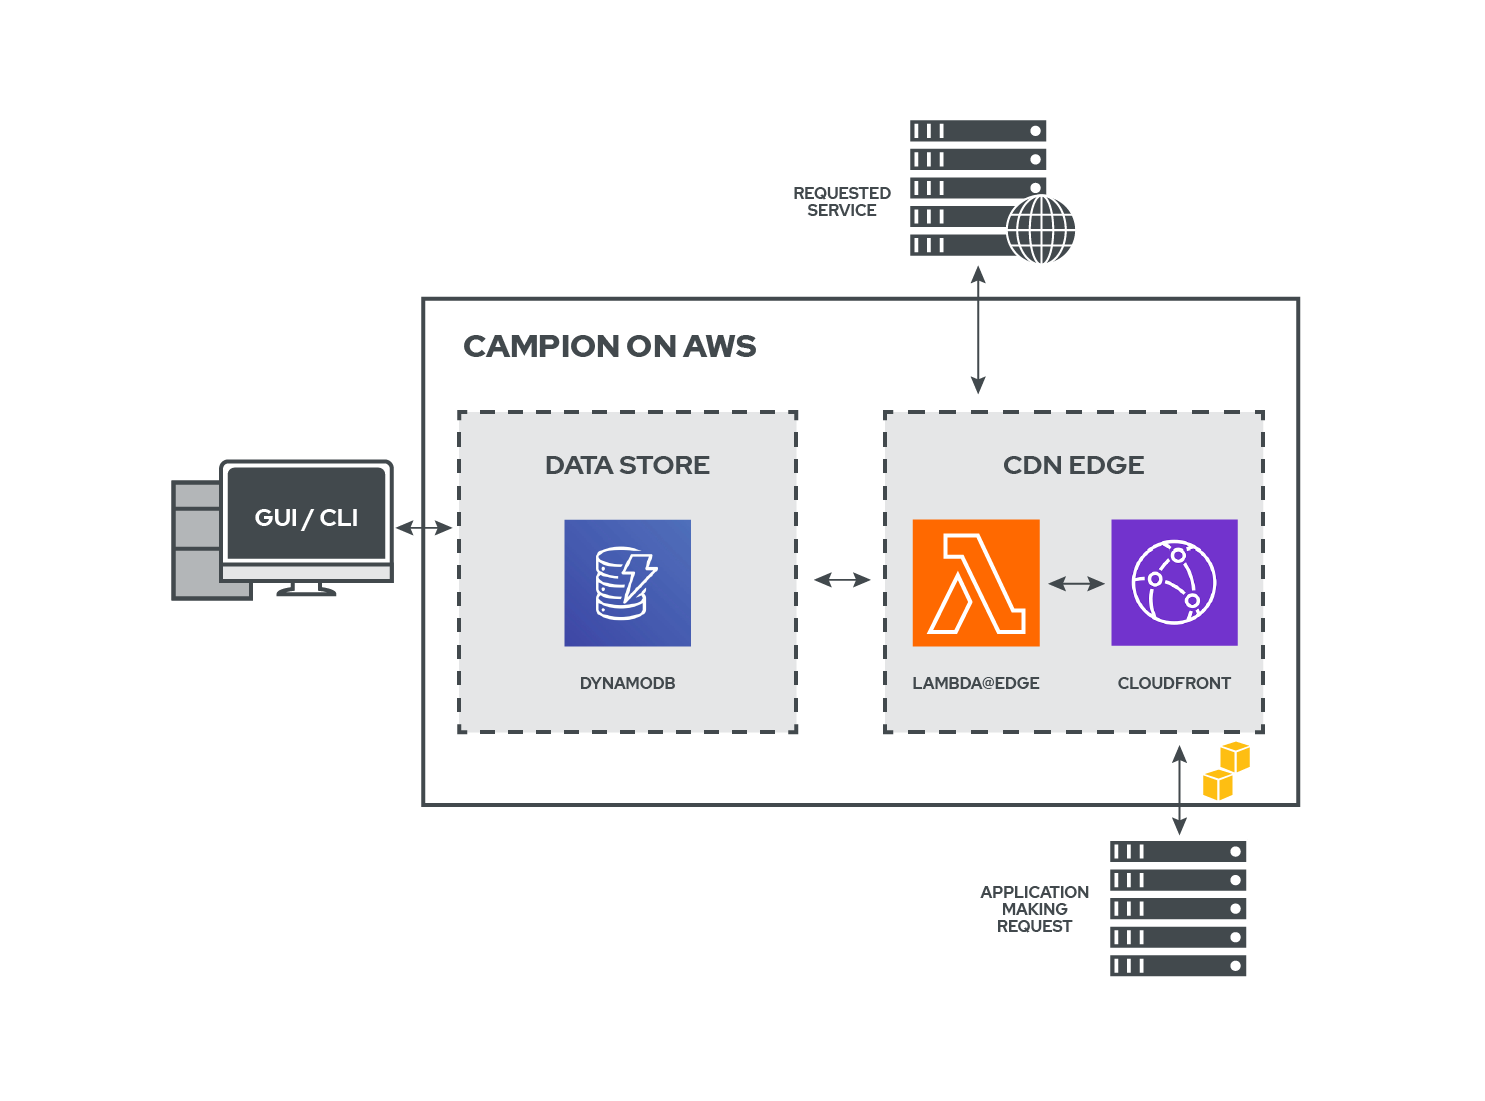 Campion infrastructure diagram on AWS